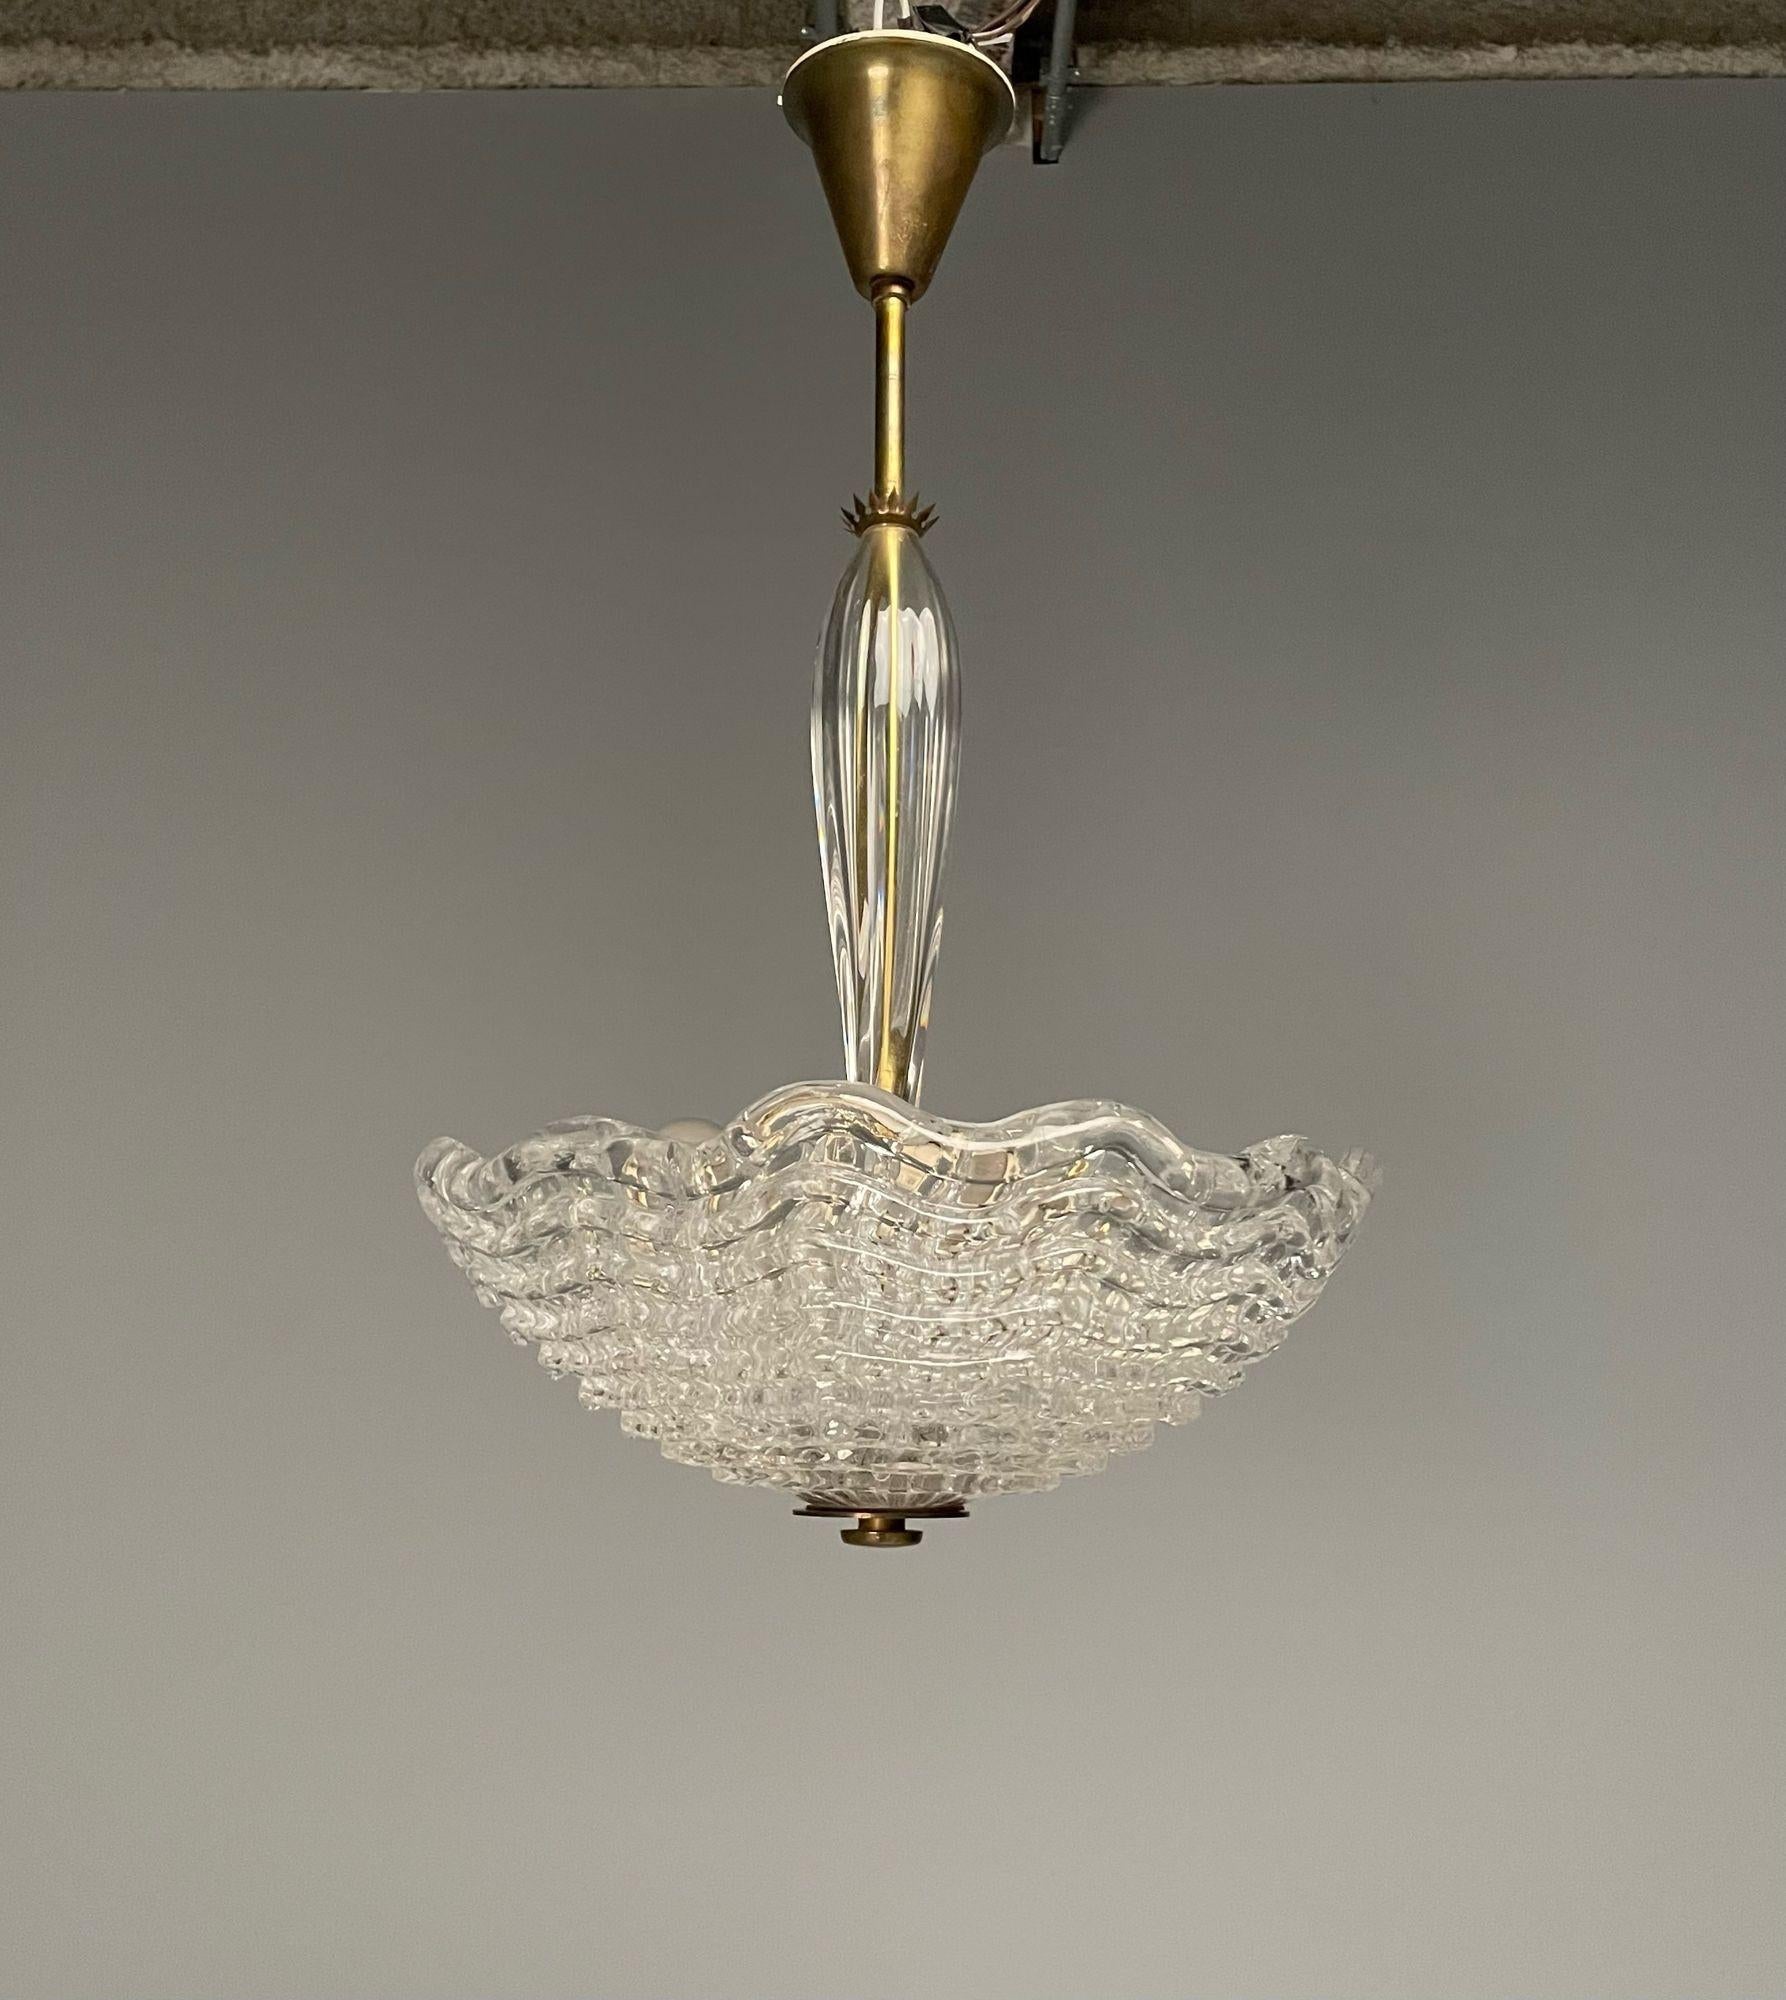 Mid-20th Century Carl Fagerlund, Orrefors, Swedish Mid-Century Modern, Chandelier, Glass, 1940s For Sale